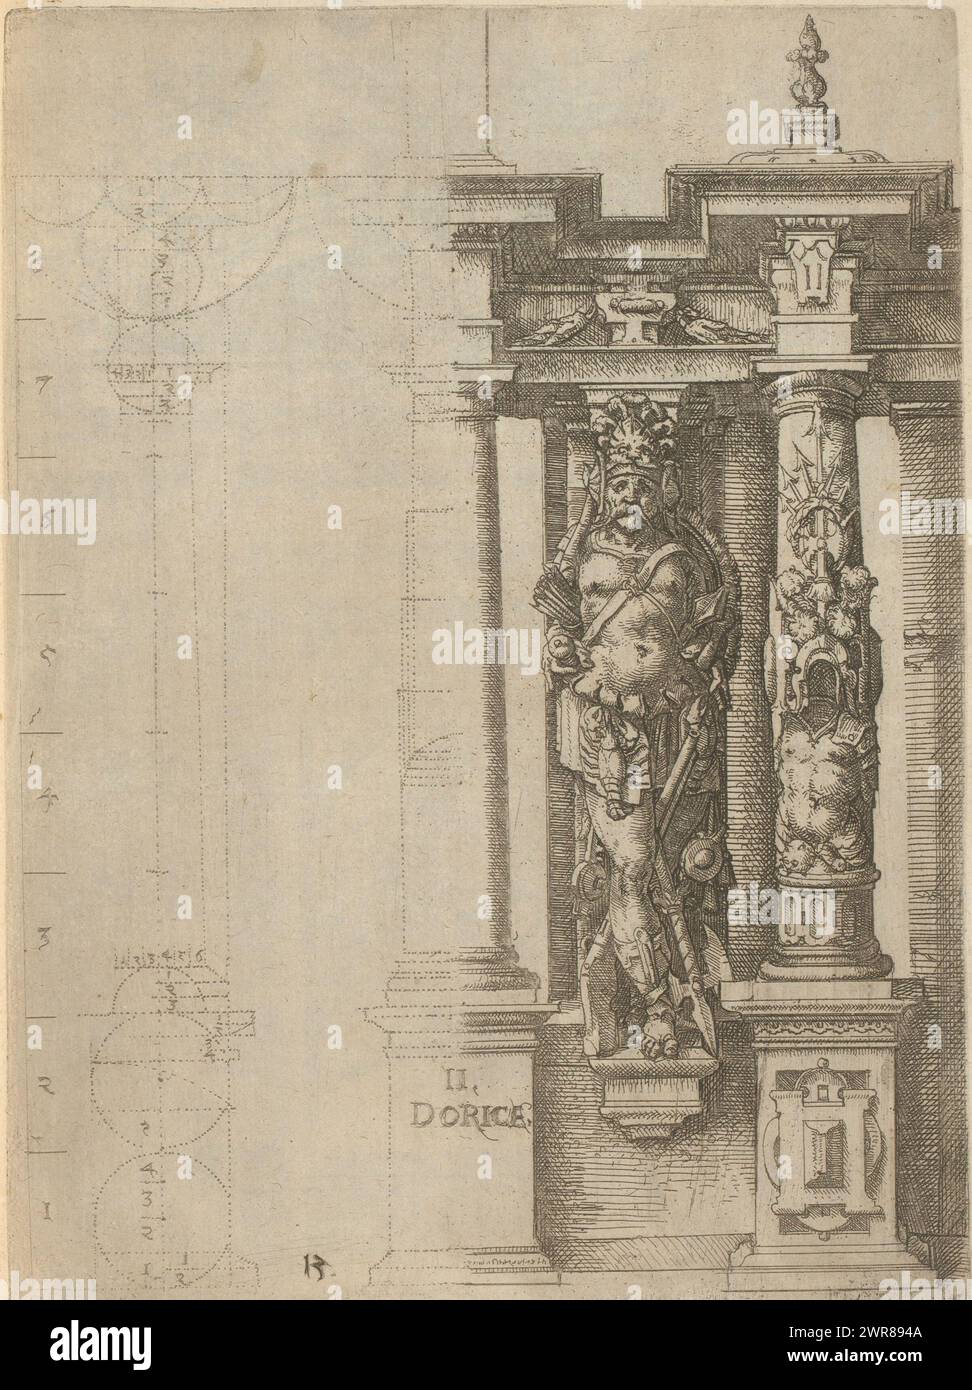 Proportions of the Doric column order with an atlante in the shape of an armed man between two columns, Dorica (title on object), Architectura (series title), Numbered: 13. Print is part of a book., print maker: Wendel Dietterlin (I), publisher: Bernhard Jobin, Straatsburg (Frankrijk), 1593 - 1595, paper, etching, height 246 mm × width 186 mm Stock Photo